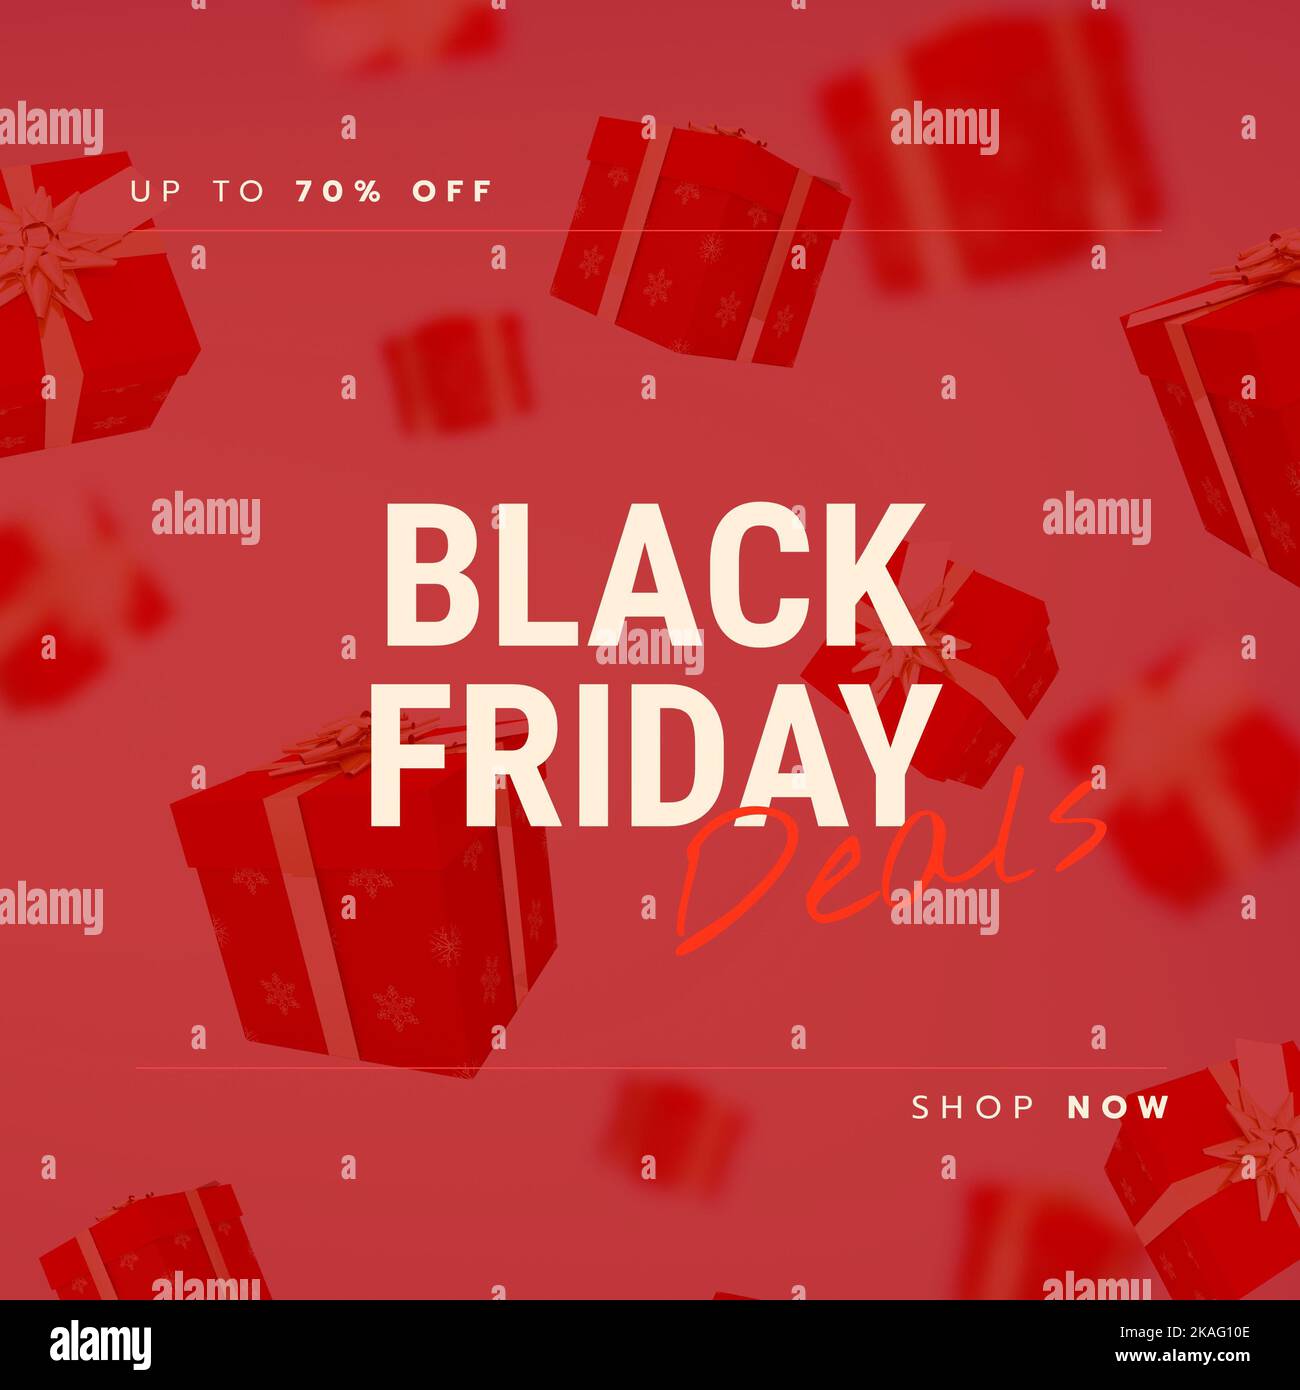 Composition of up to 70 percent off black friday deals shop now text over presents Stock Photo